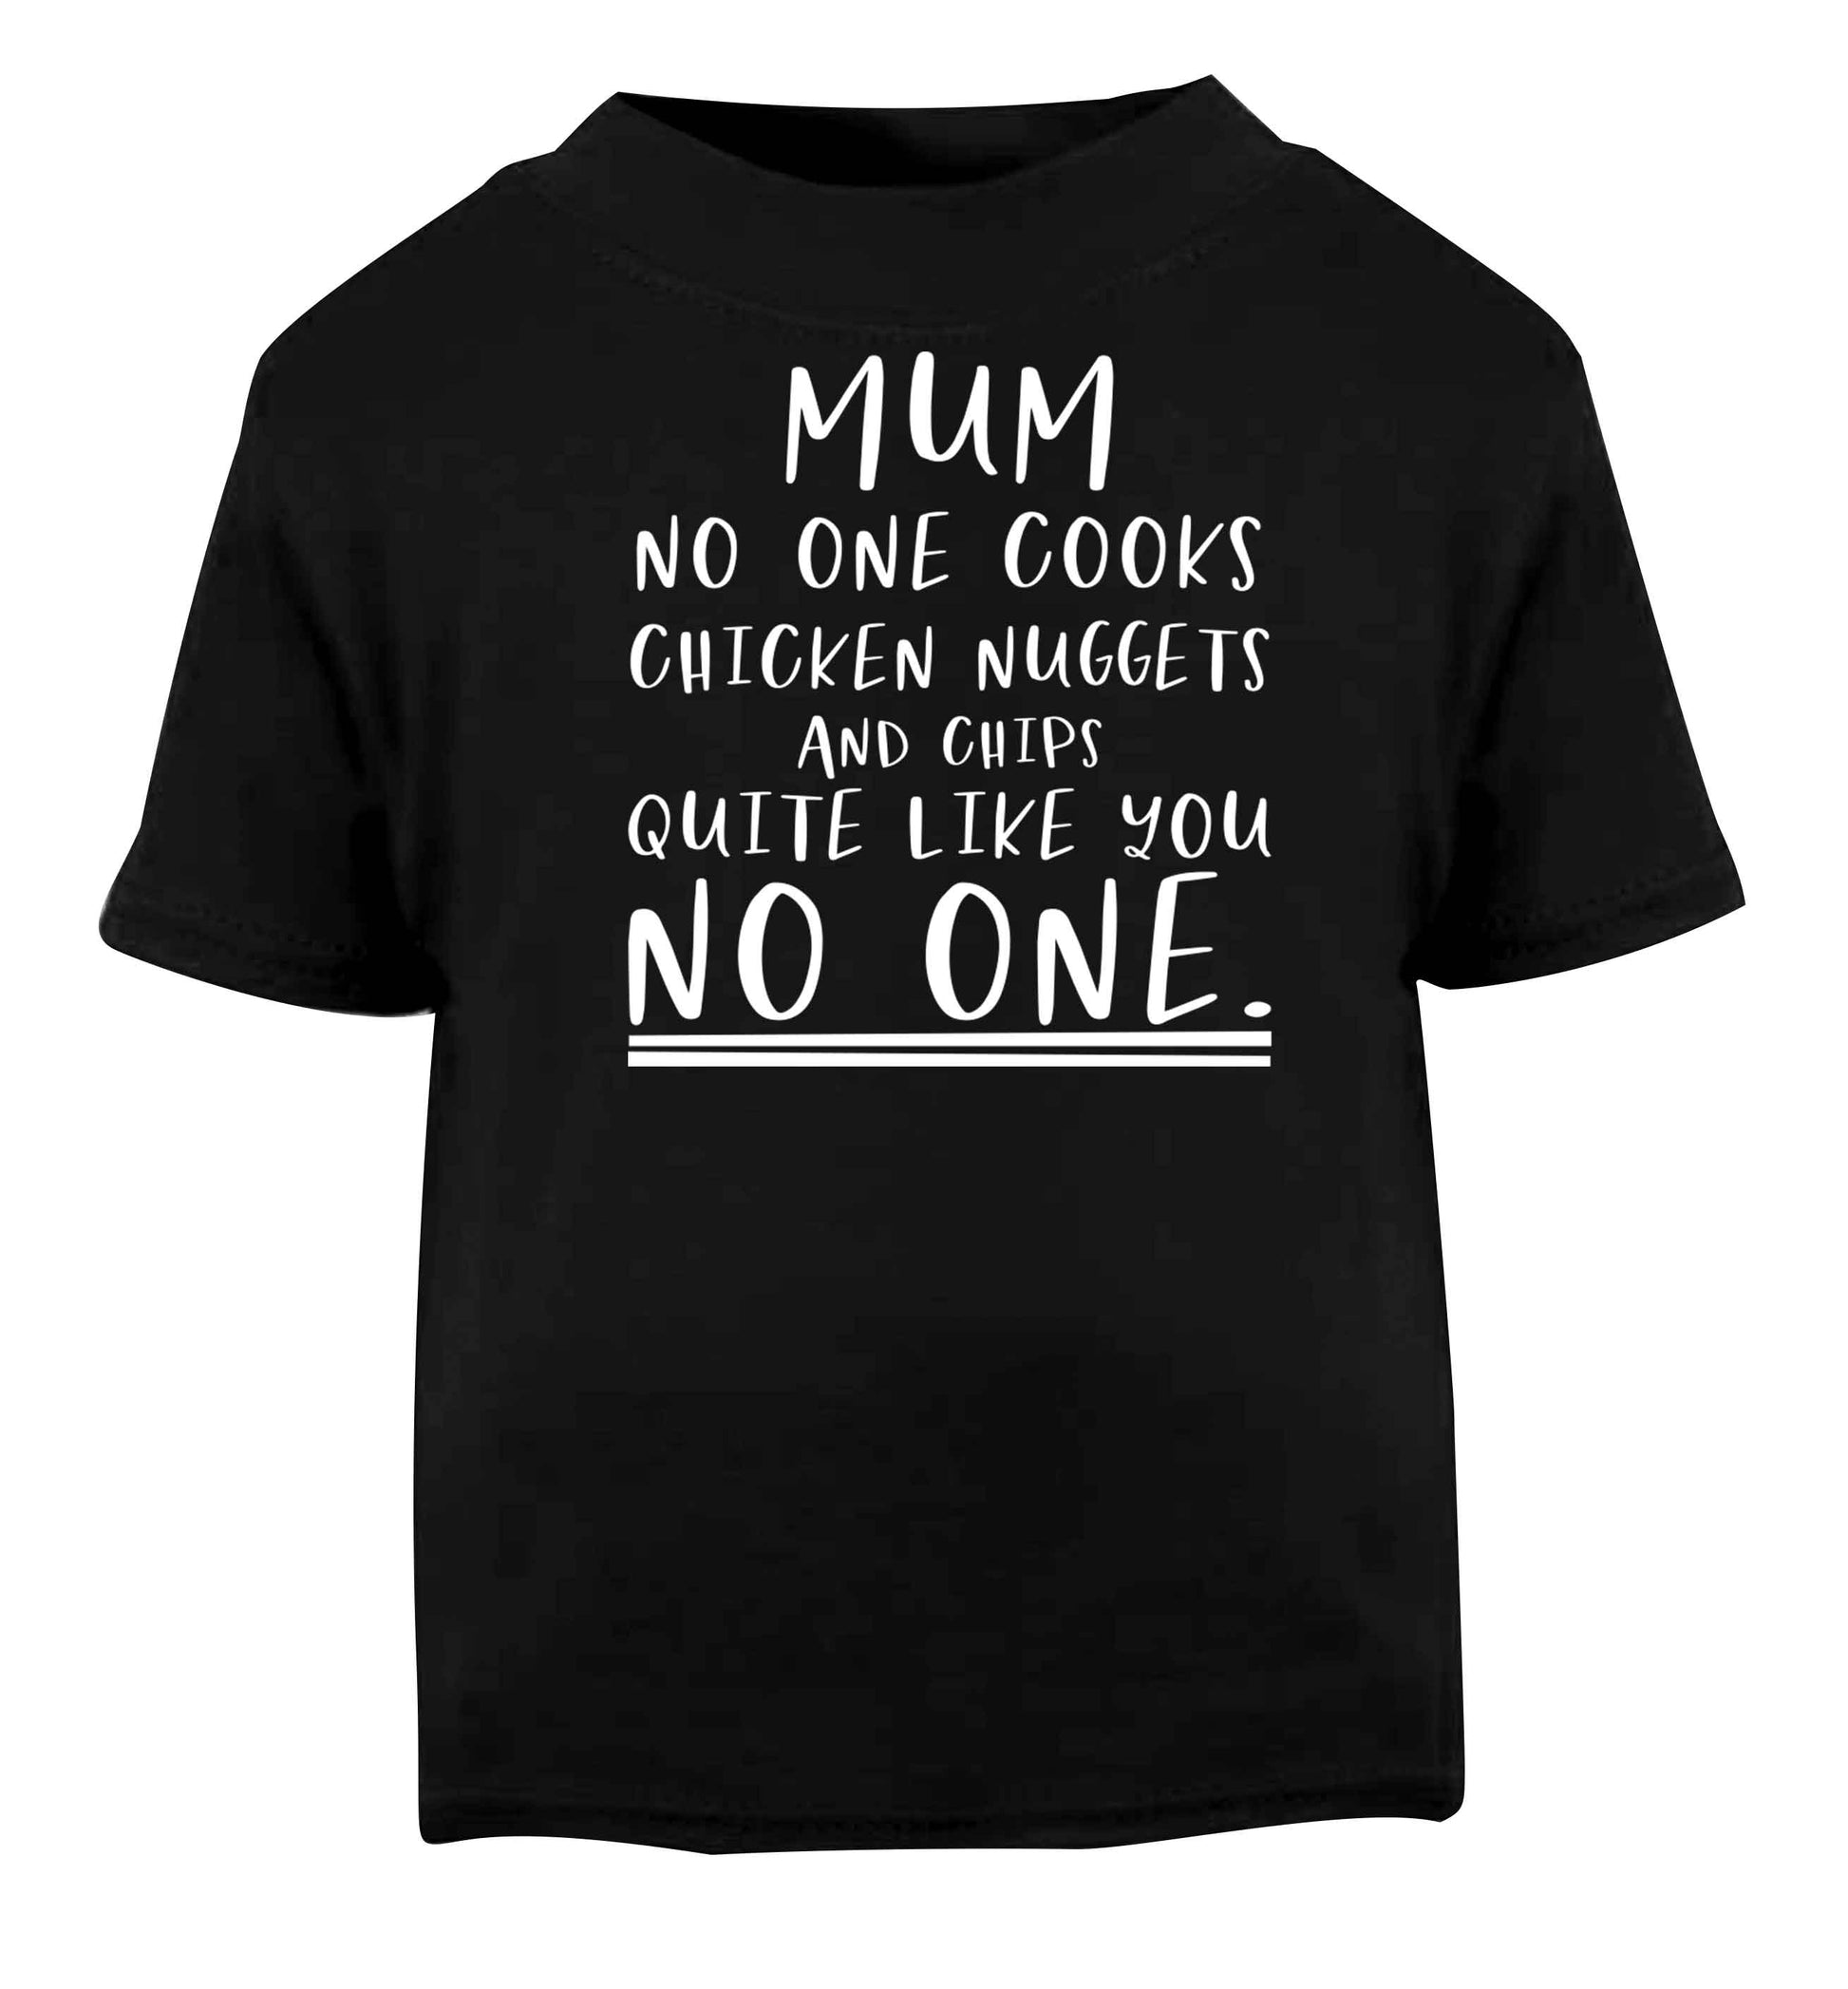 Super funny sassy gift for mother's day or birthday!  Mum no one cooks chicken nuggets and chips like you no one Black baby toddler Tshirt 2 years